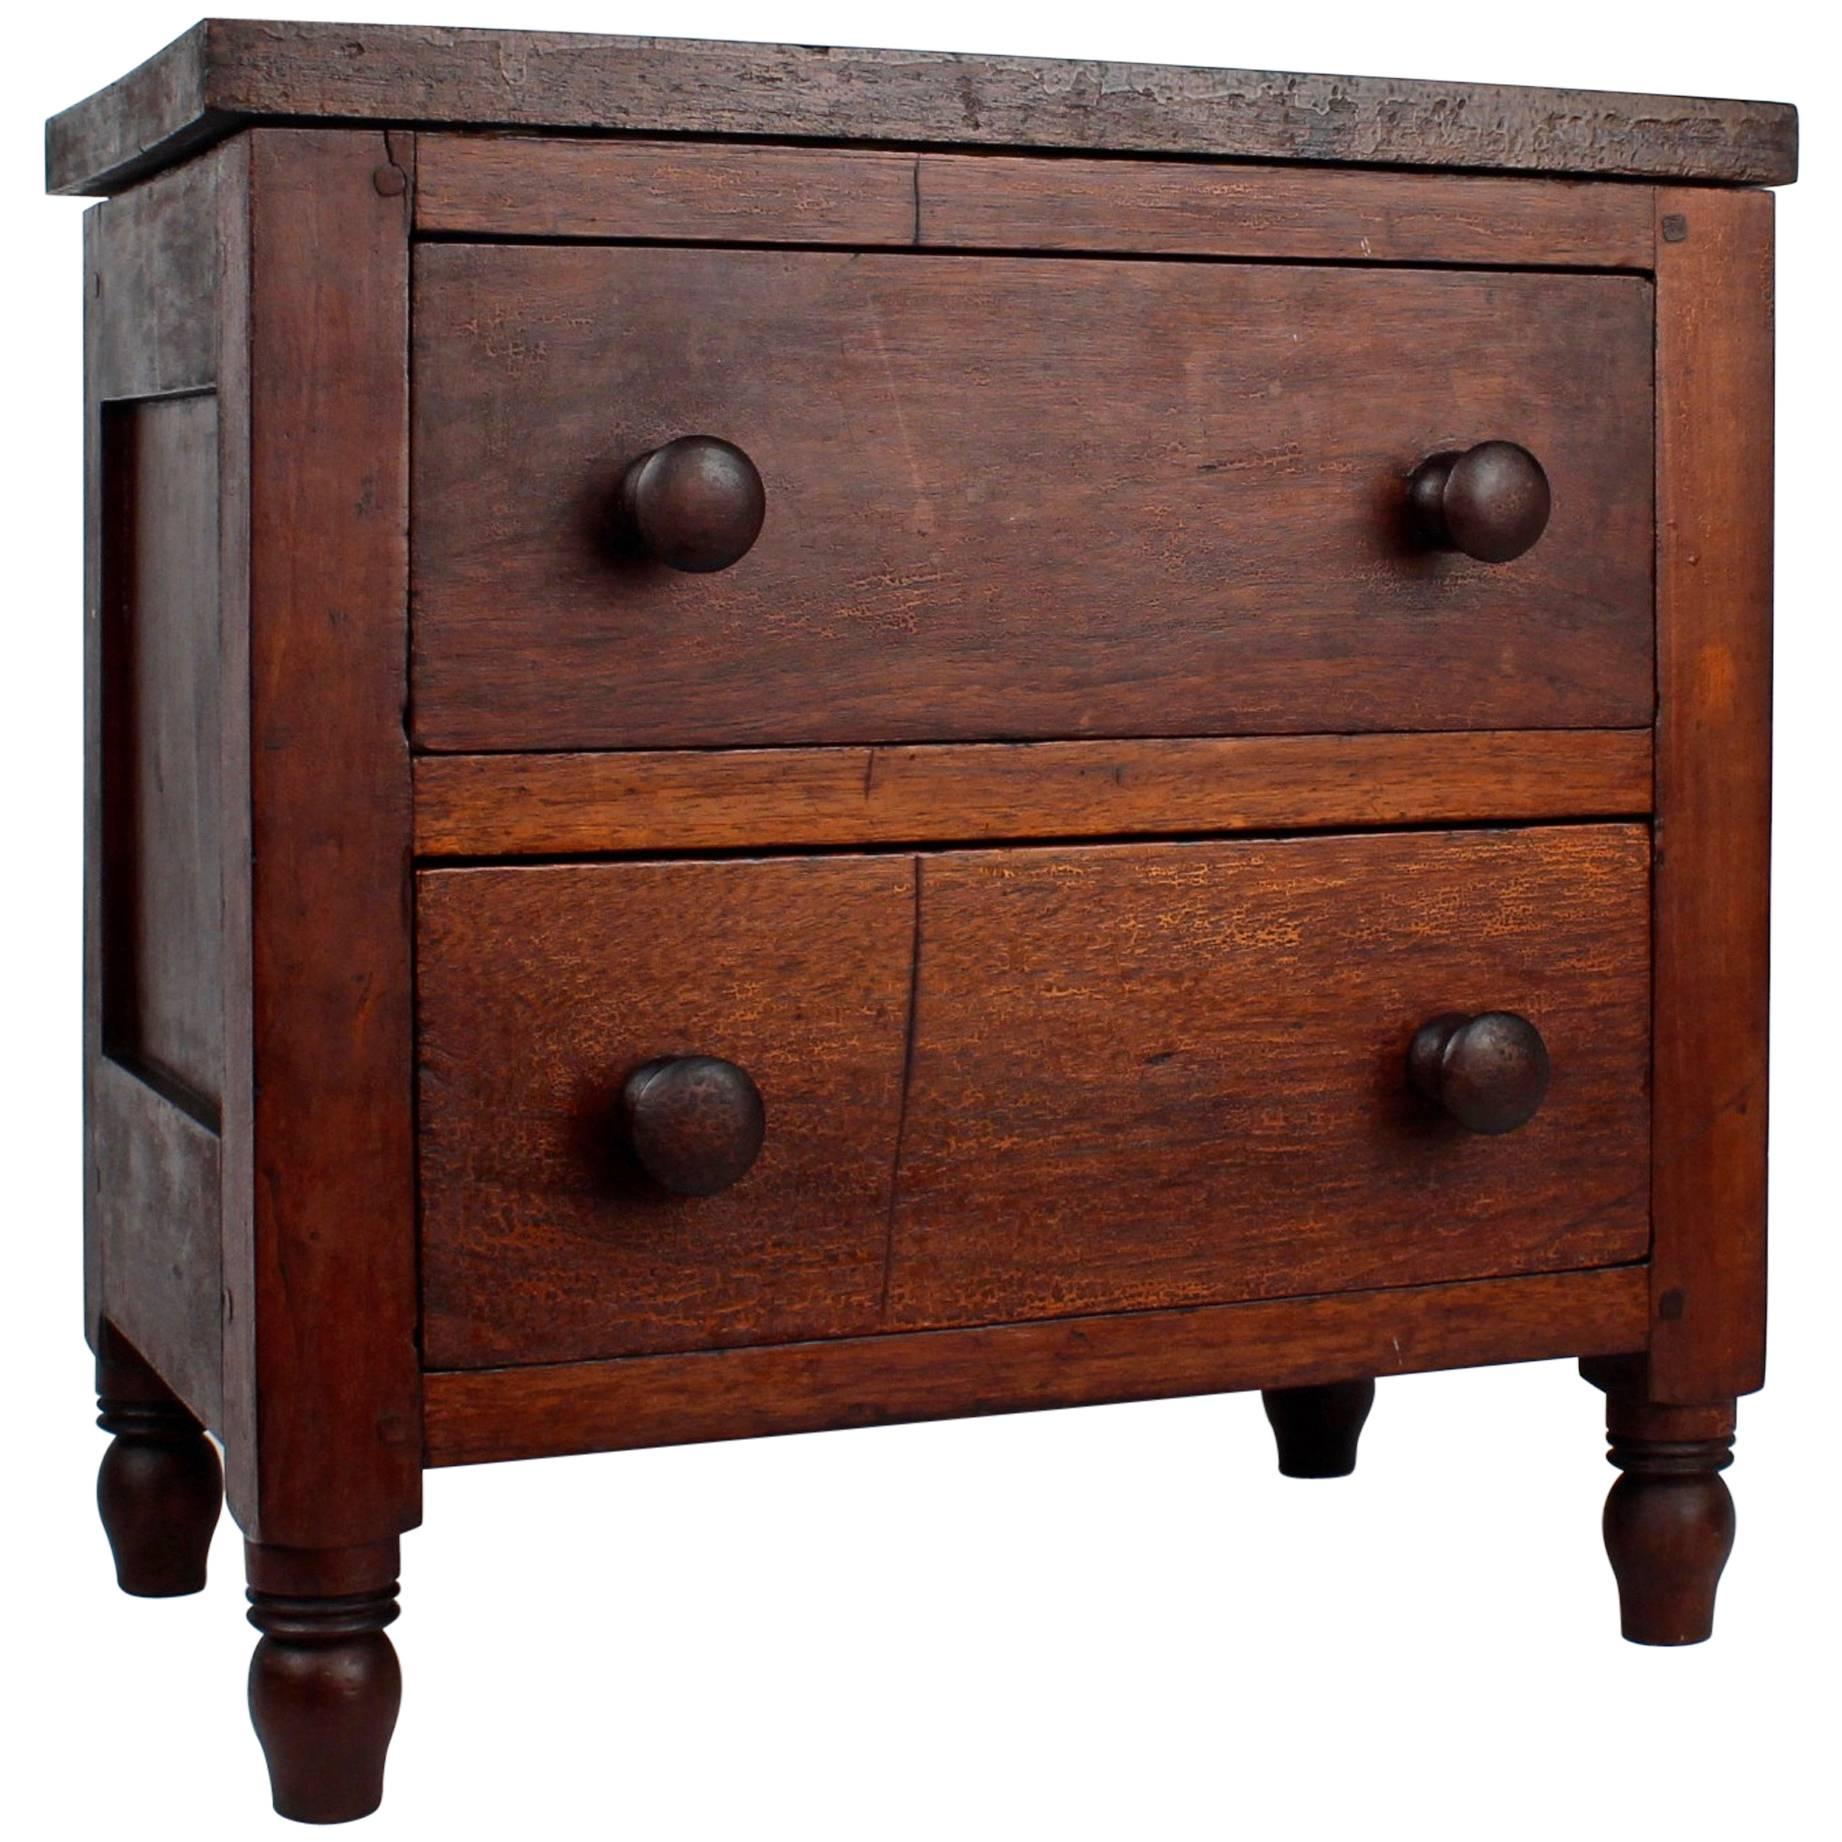 Late 19th Century Pennsylvania Miniature Walnut & Pine Paneled Chest of Drawers For Sale